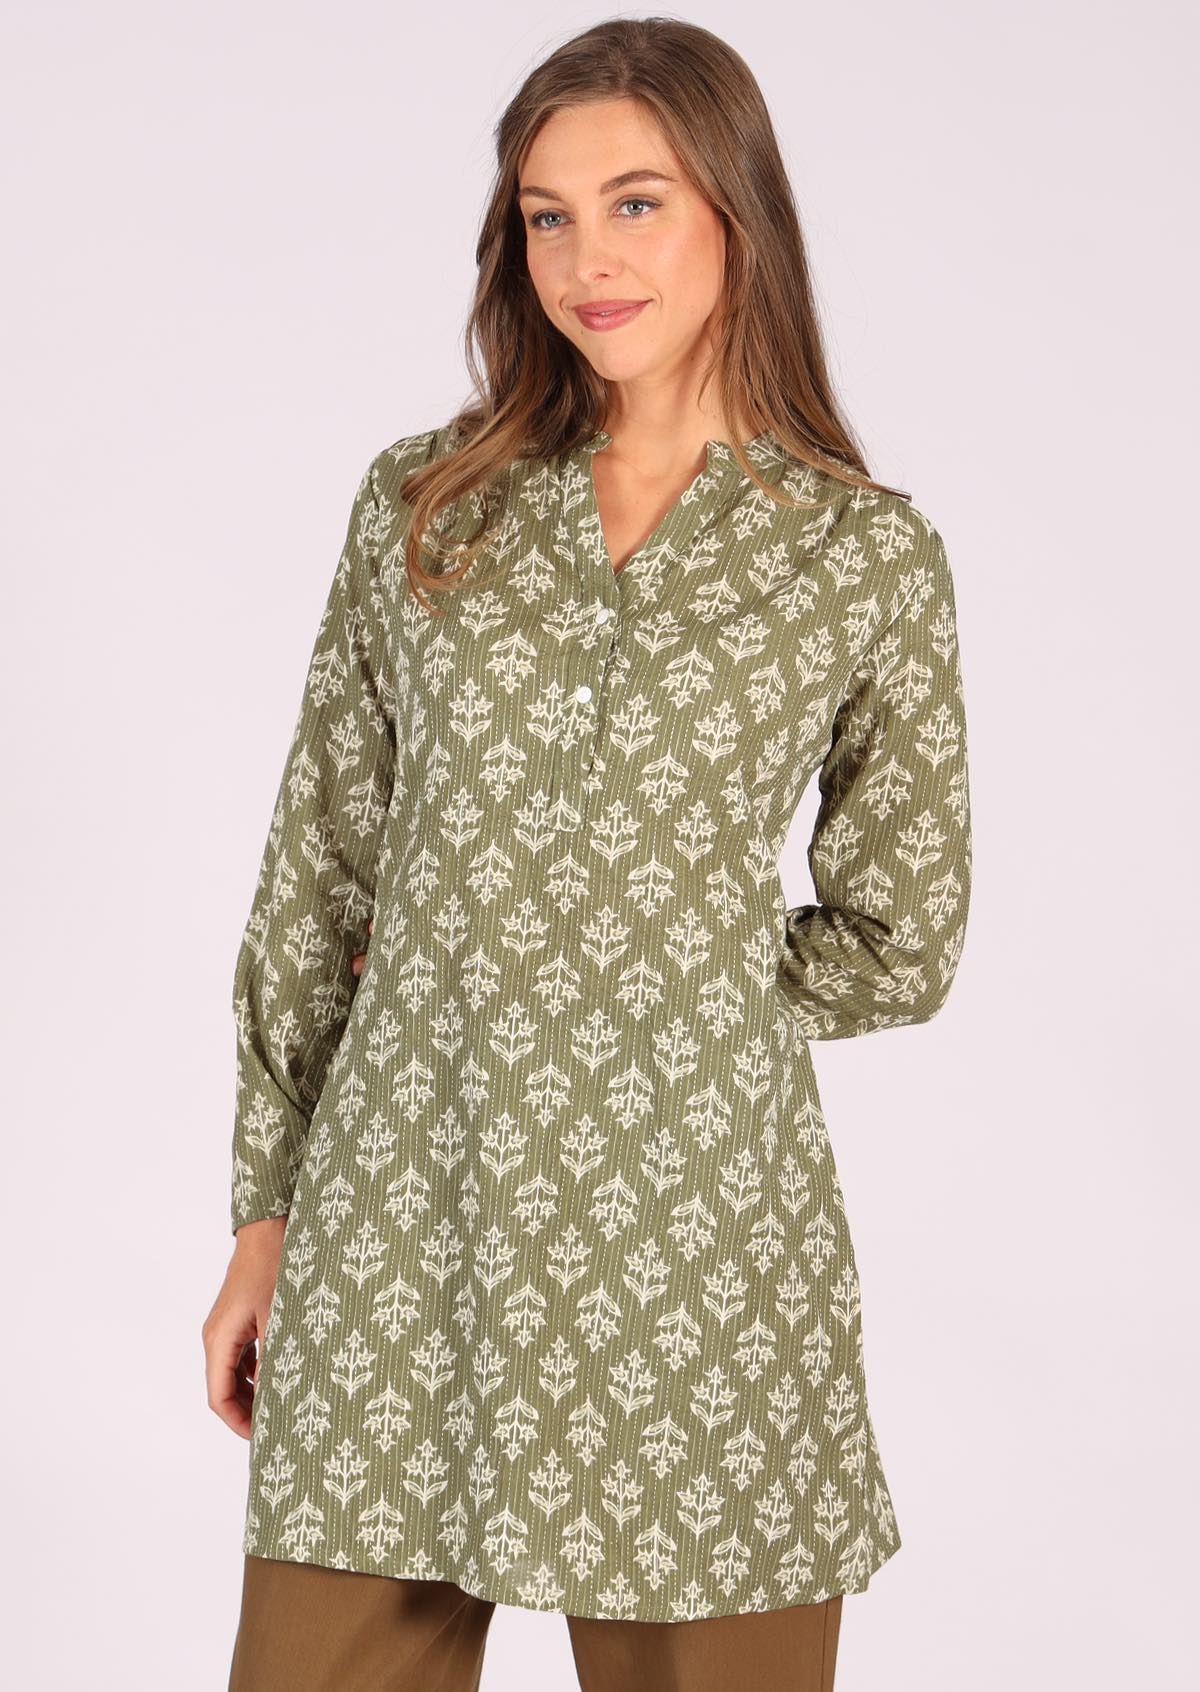 100% cotton shirt dress in green with flowers and kantha stitching